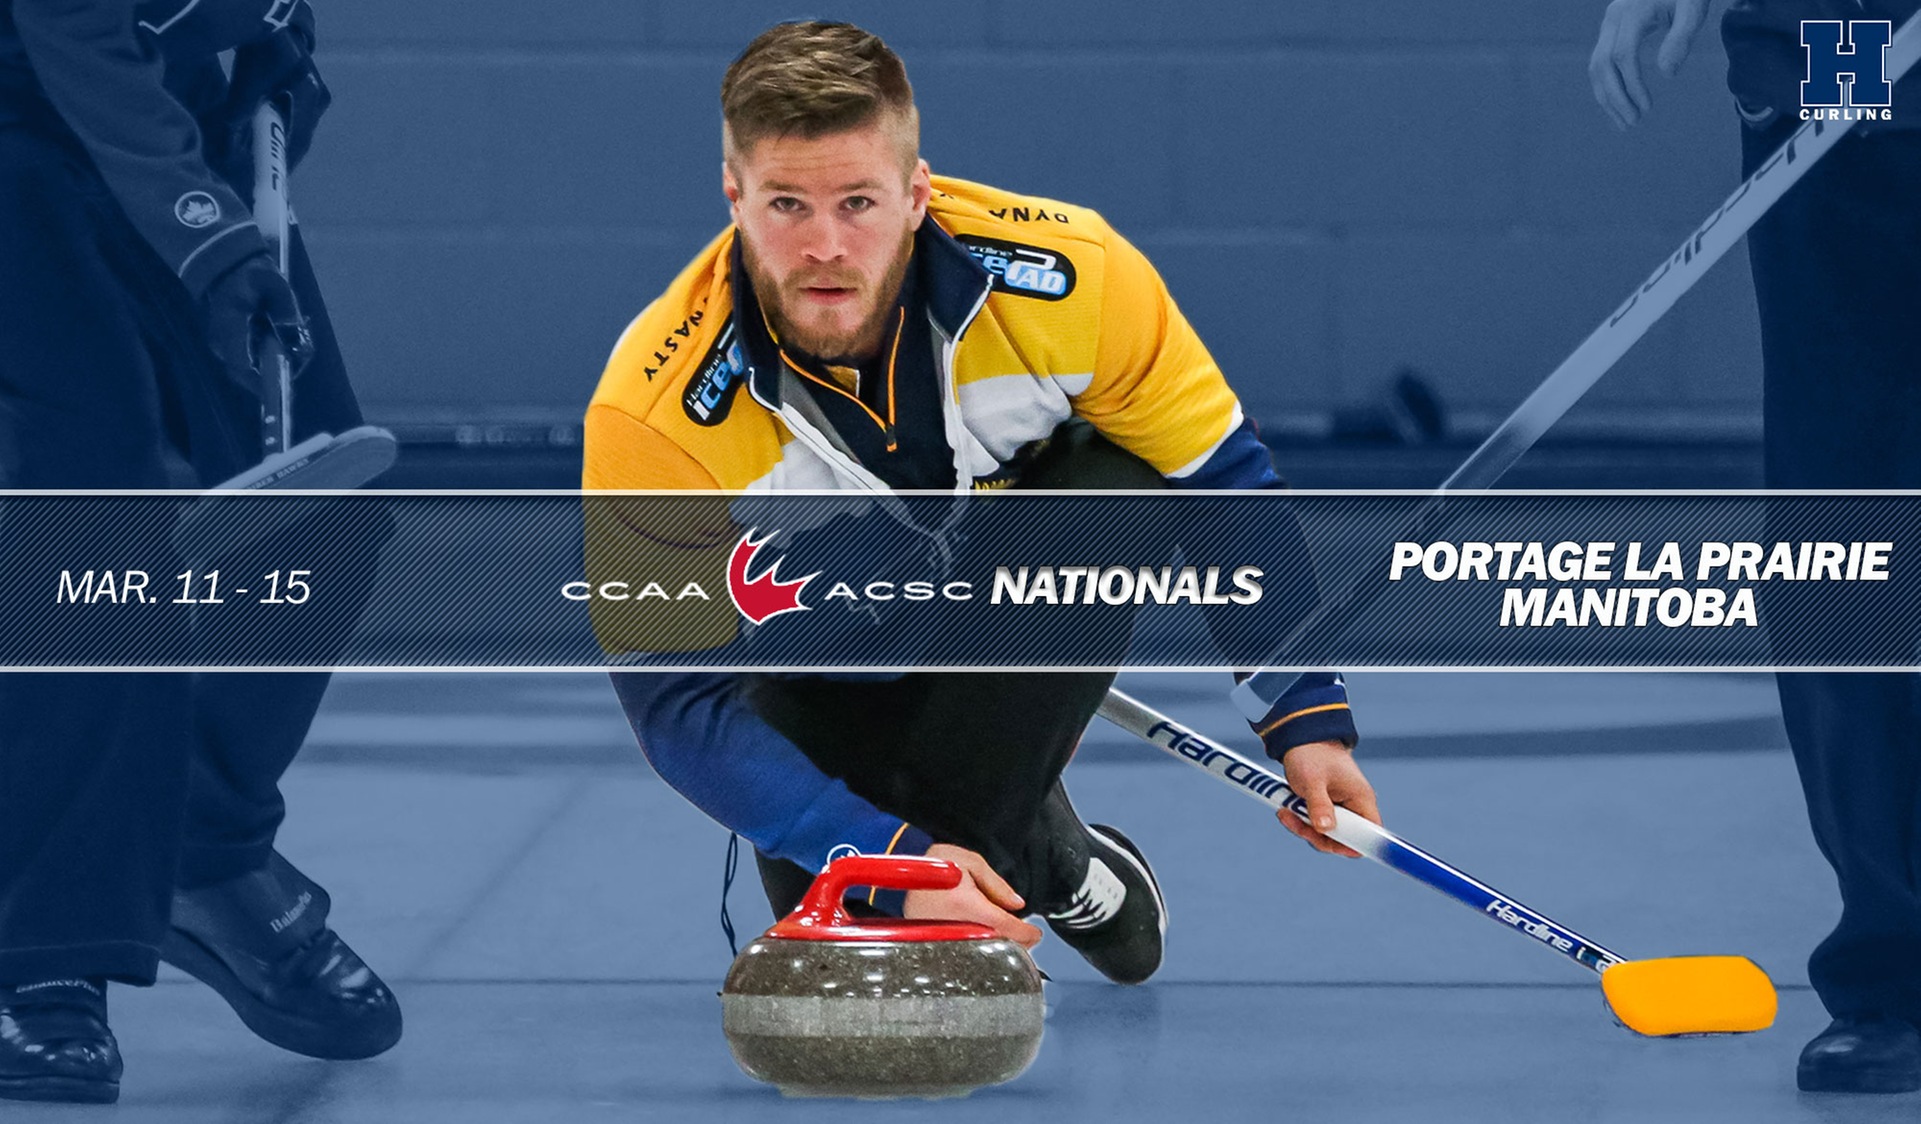 Humber Curling Heading to Manitoba For 2020 National Tournament